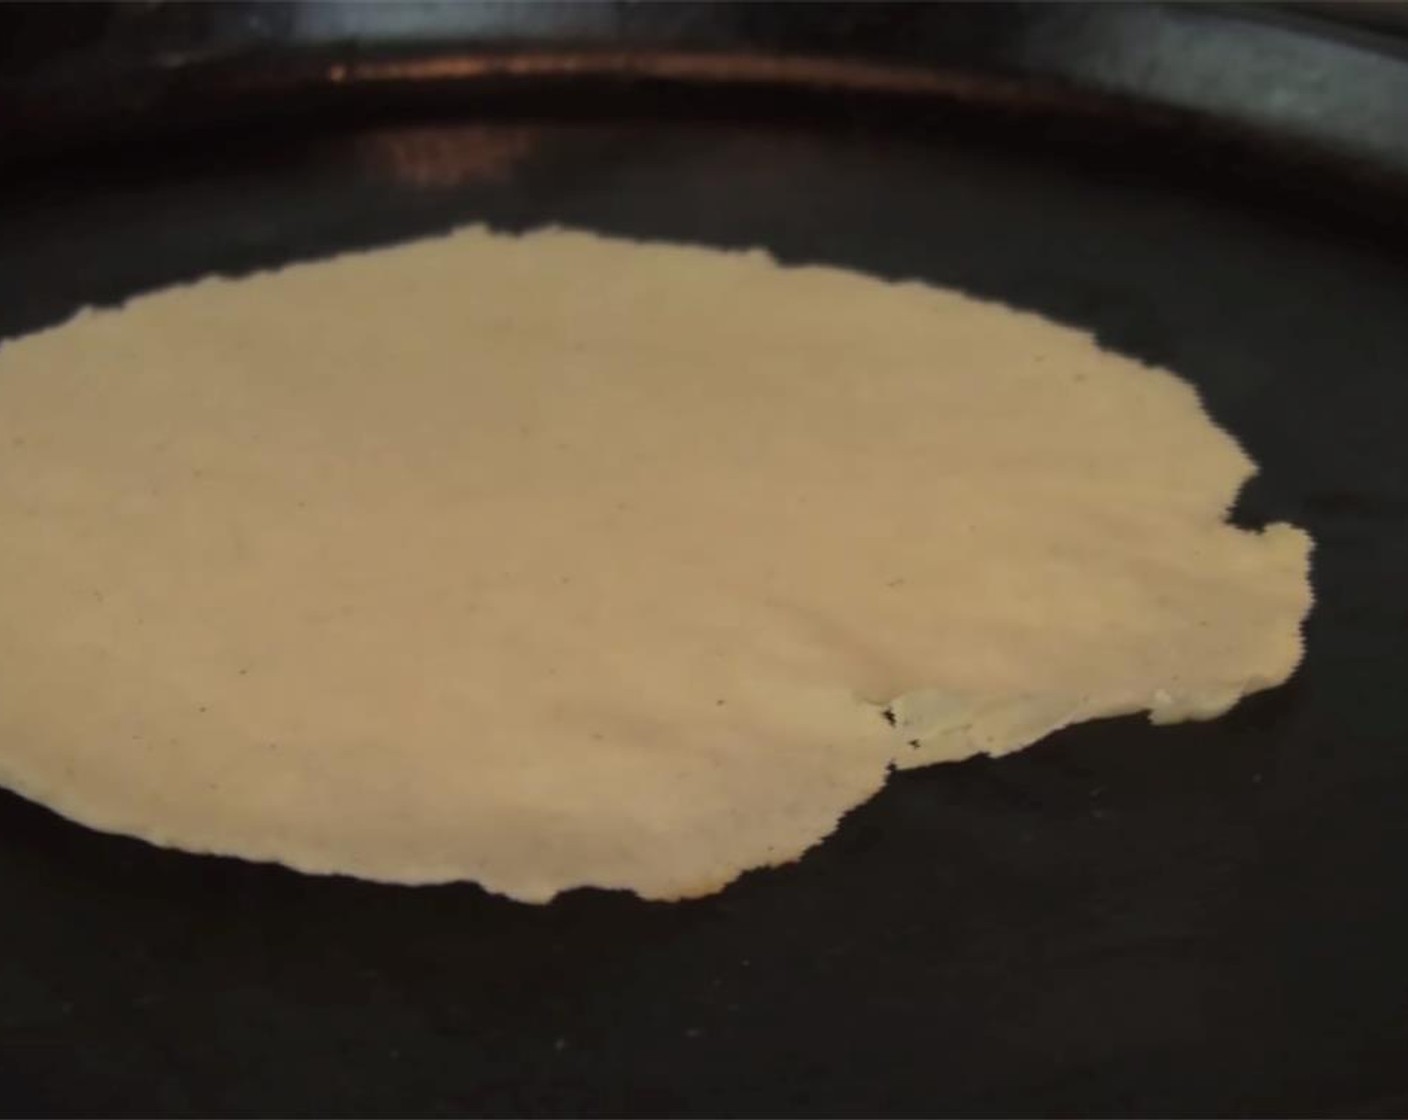 step 7 Heat cast iron pan over medium heat. Lay tortilla onto pan, and let sit until the edges start to lift up. Flip, and let cook another 1 to 1 1/2 minutes. Remove from heat, and repeat with rest of dough. Enjoy!